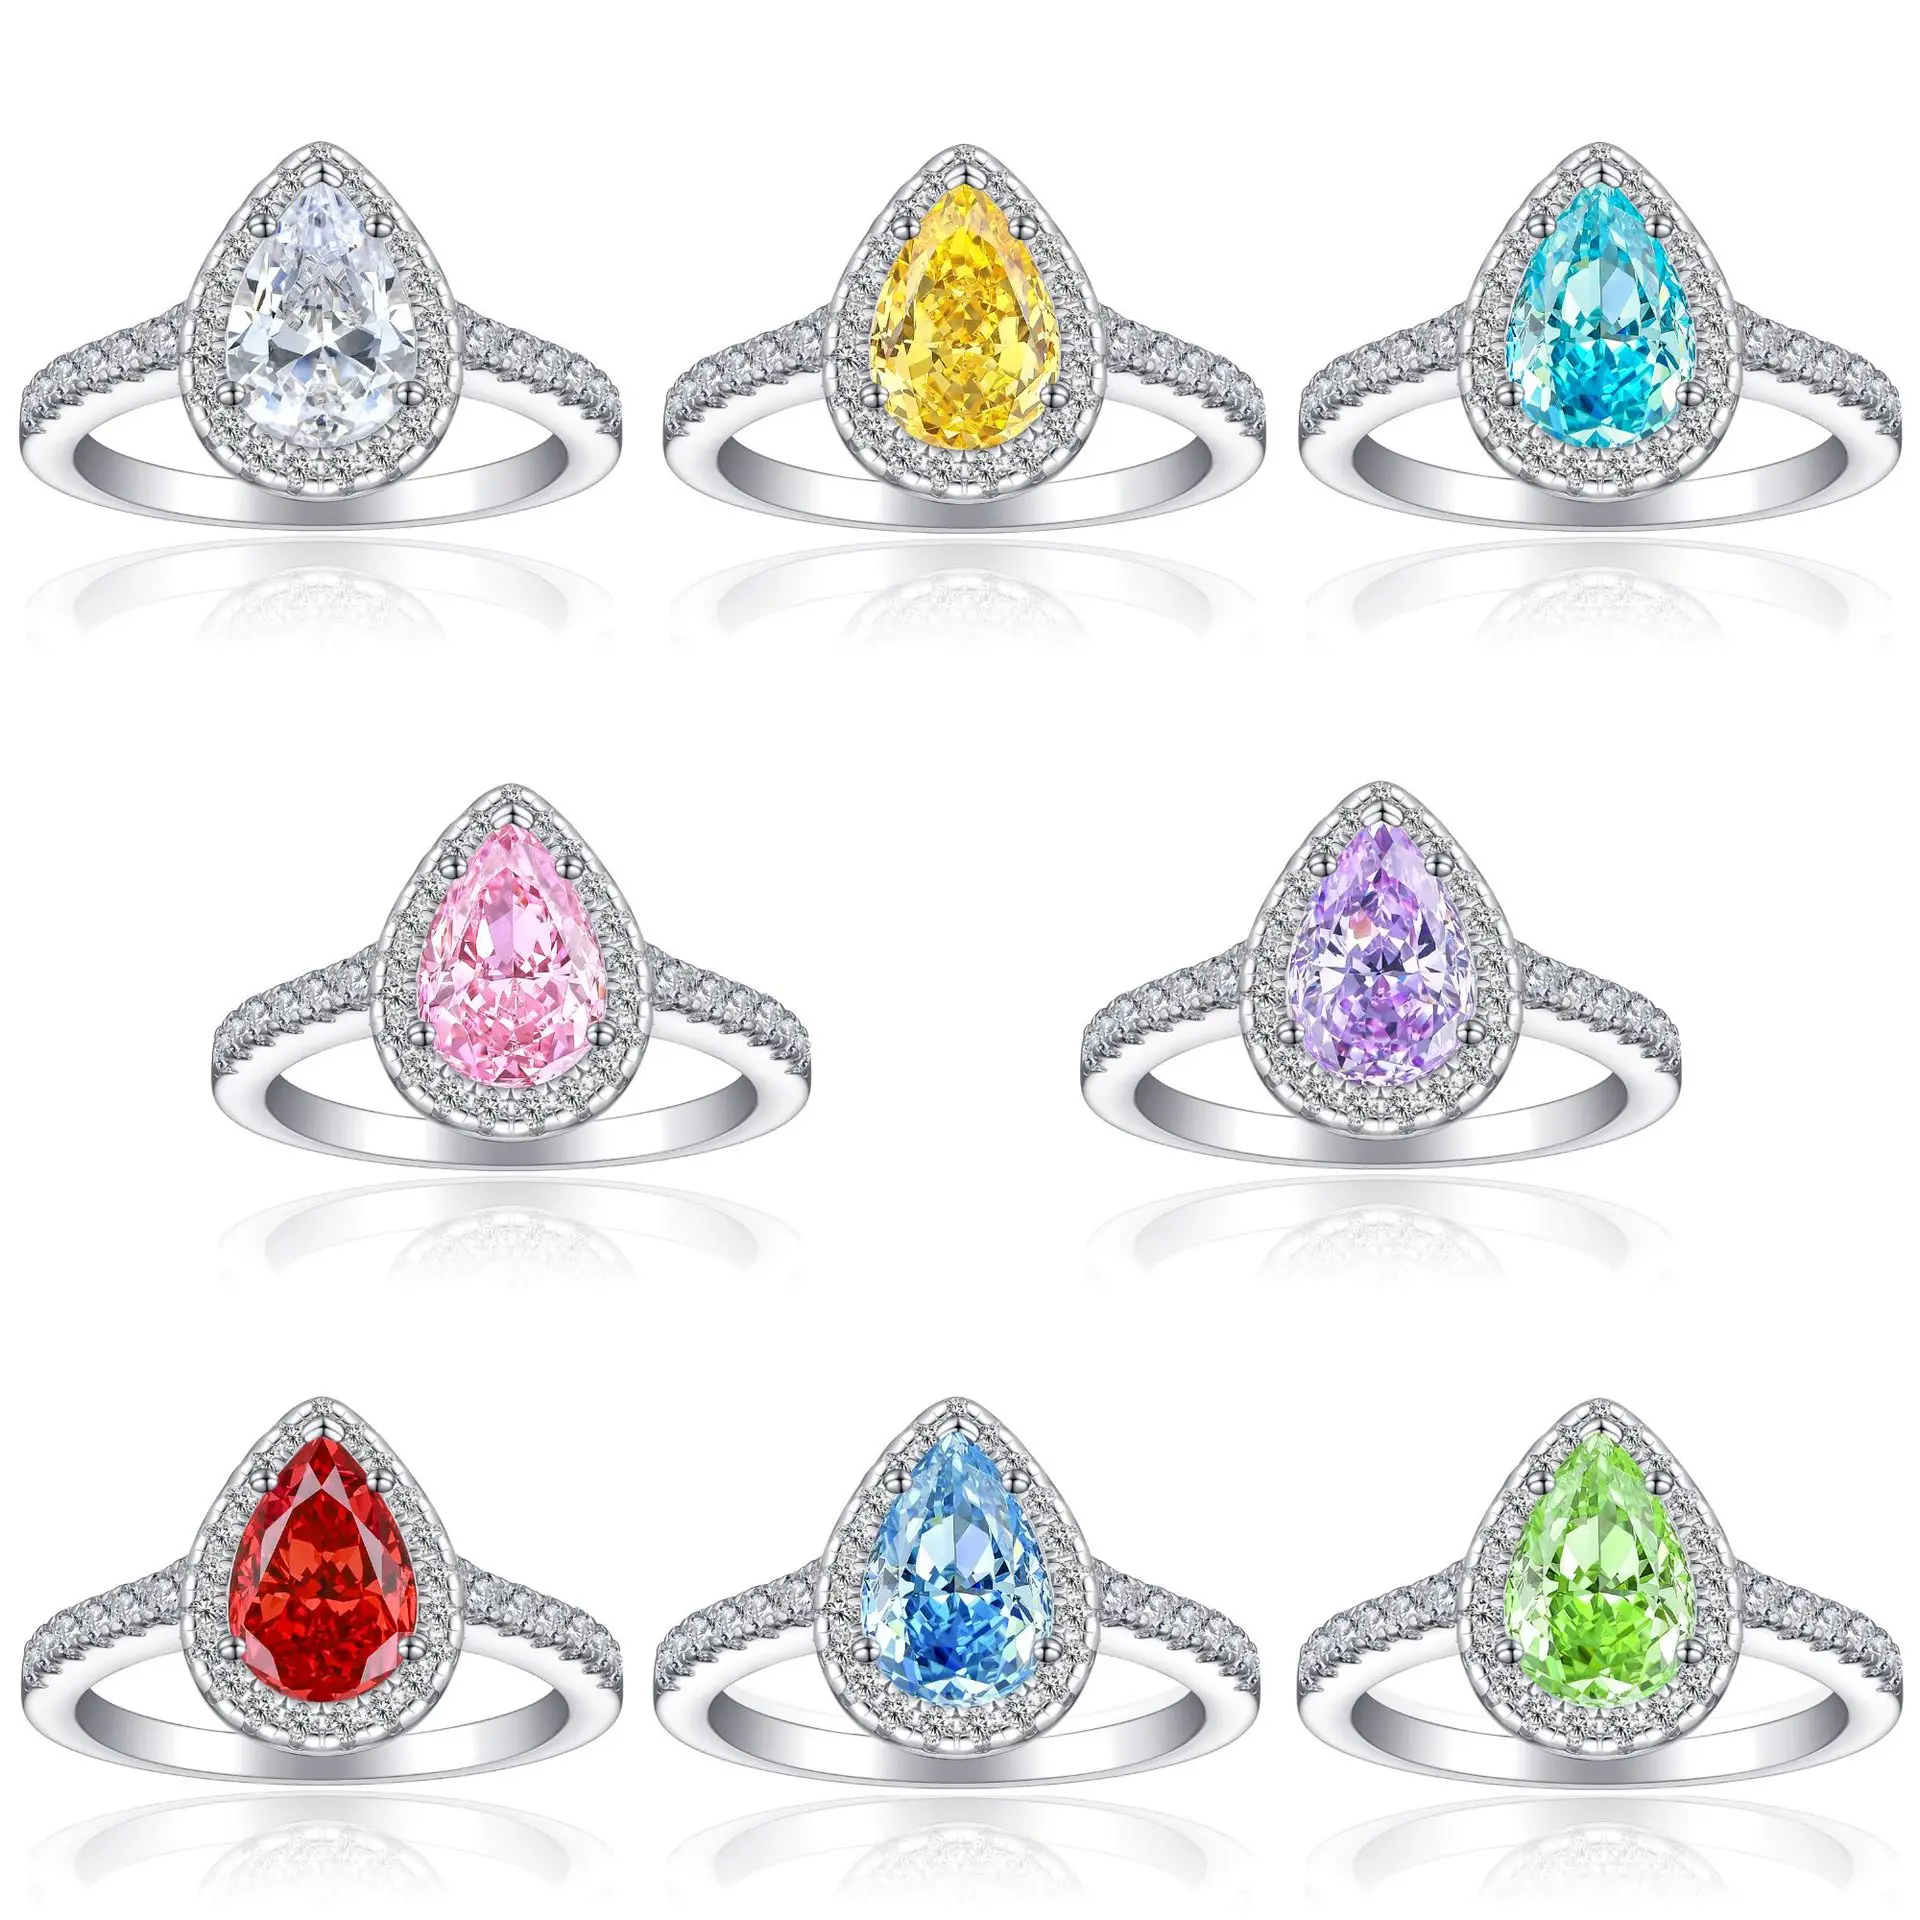 

100% S925 Sterling Silver High Quality Drop Shaped Gemstone Ring Premium Sense Luxury Zircon ring Party jewelry gift